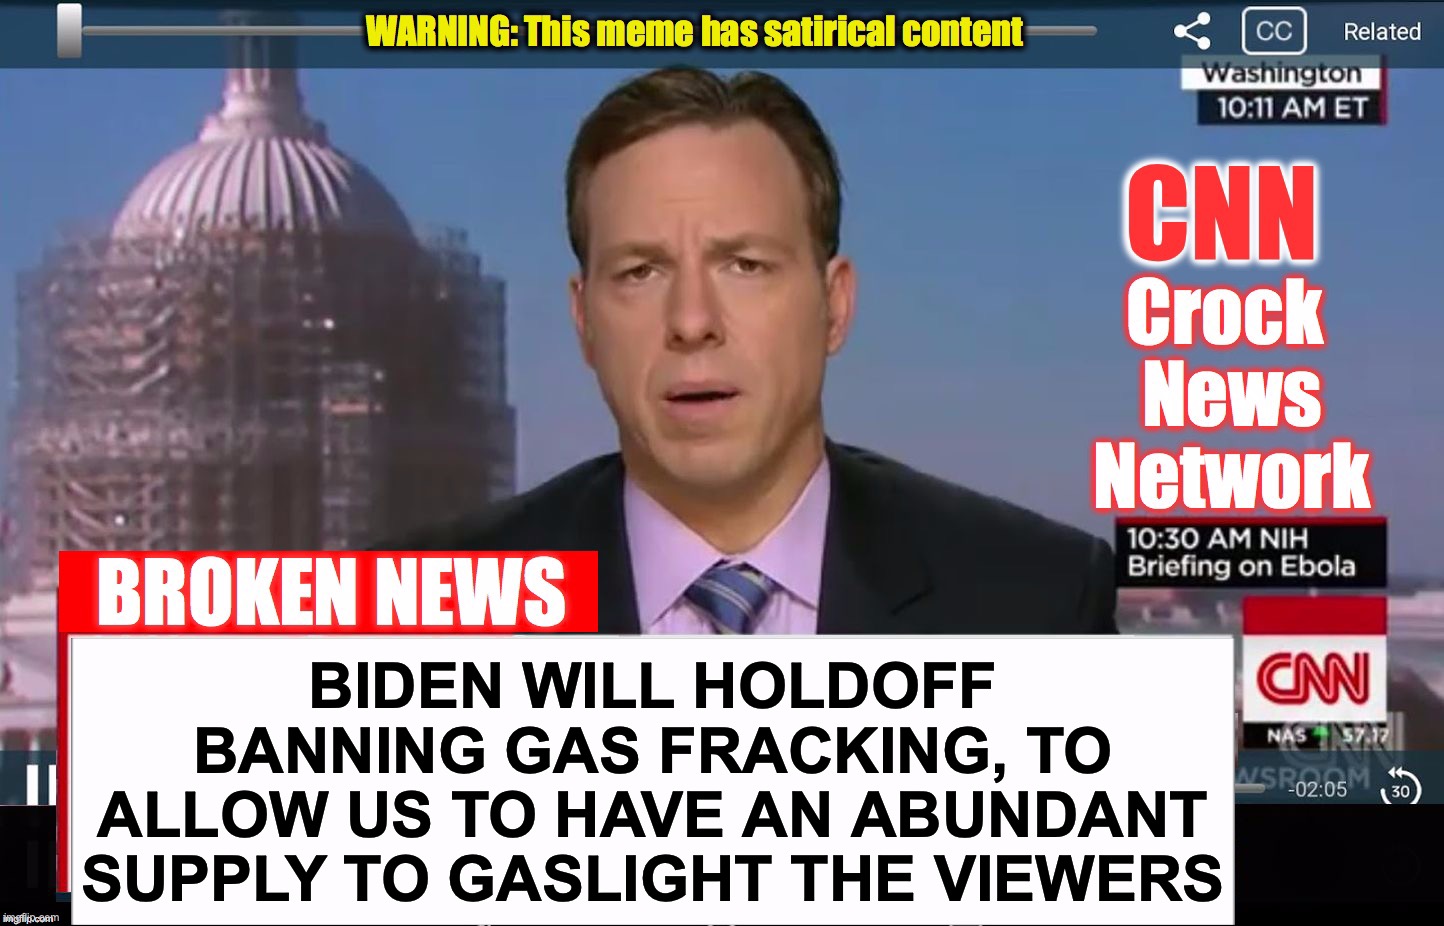 CNN Broken News  | BIDEN WILL HOLDOFF BANNING GAS FRACKING, TO ALLOW US TO HAVE AN ABUNDANT SUPPLY TO GASLIGHT THE VIEWERS | image tagged in cnn broken news,gas,fracking,biden,election fraud | made w/ Imgflip meme maker